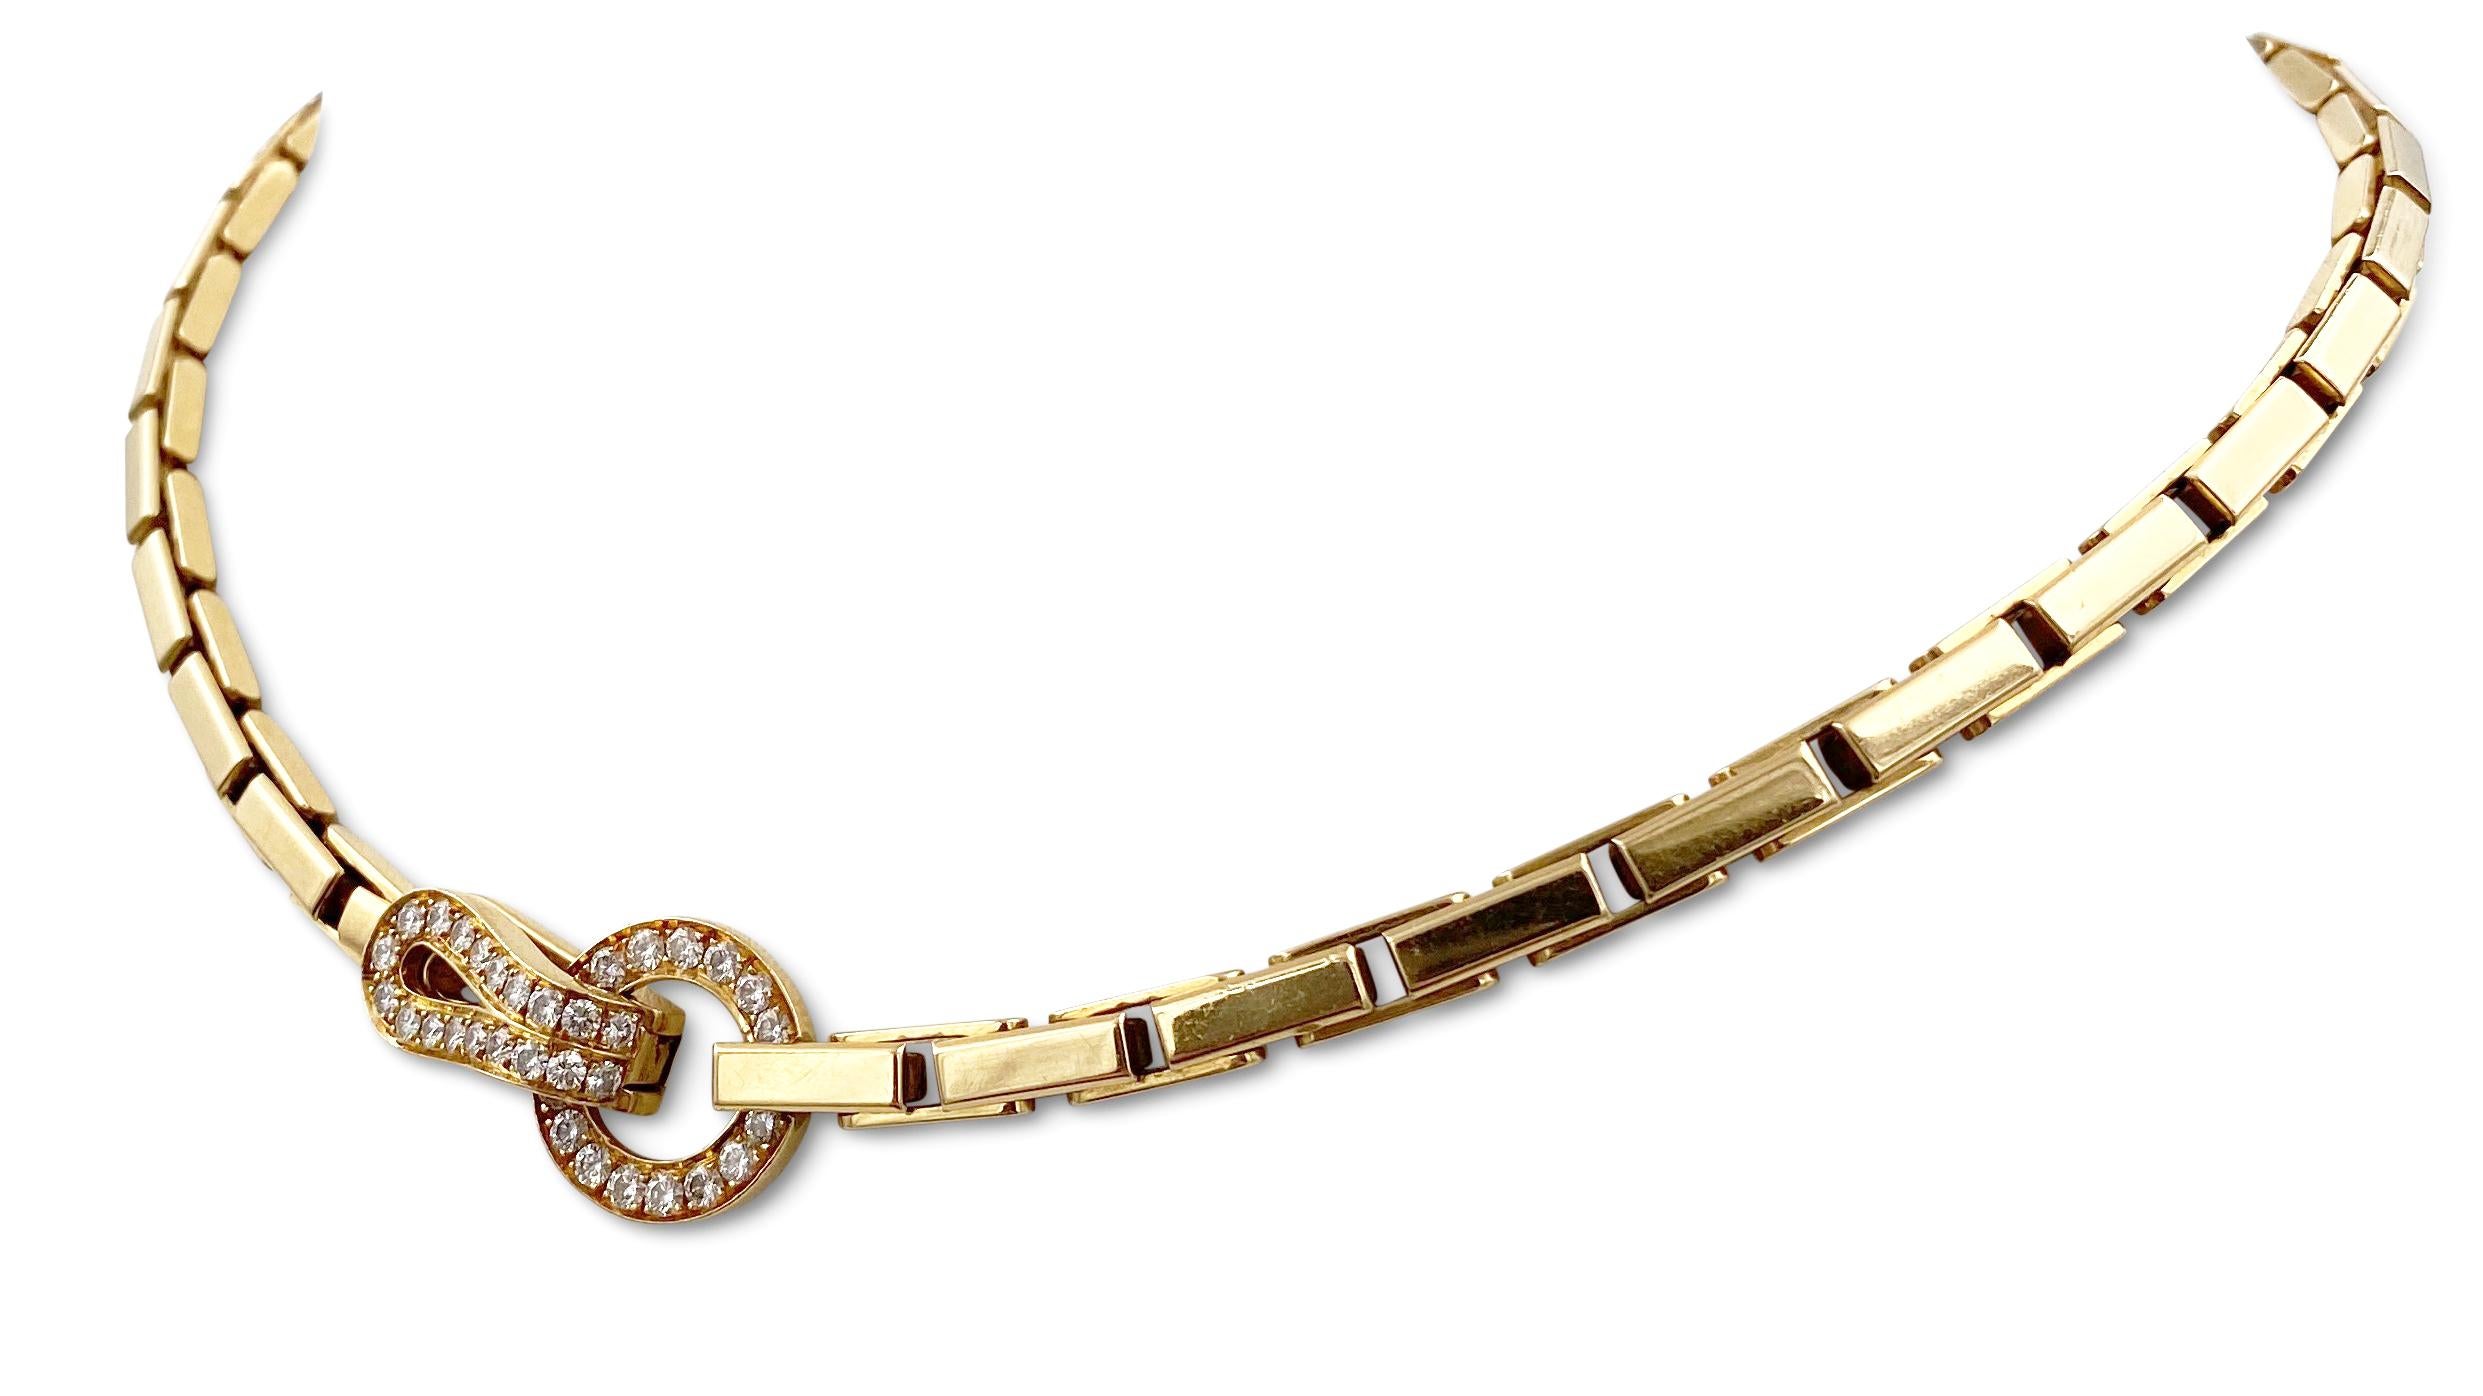 Authentic Cartier 'Agrafe' necklace crafted in 18 karat yellow gold. The hook shape clasp looks like an “Agrafe” as it means in French a clasp or hook. Clasp is set with approx. 0.96 carats of round brilliant cut diamonds (F color, VS clarity).